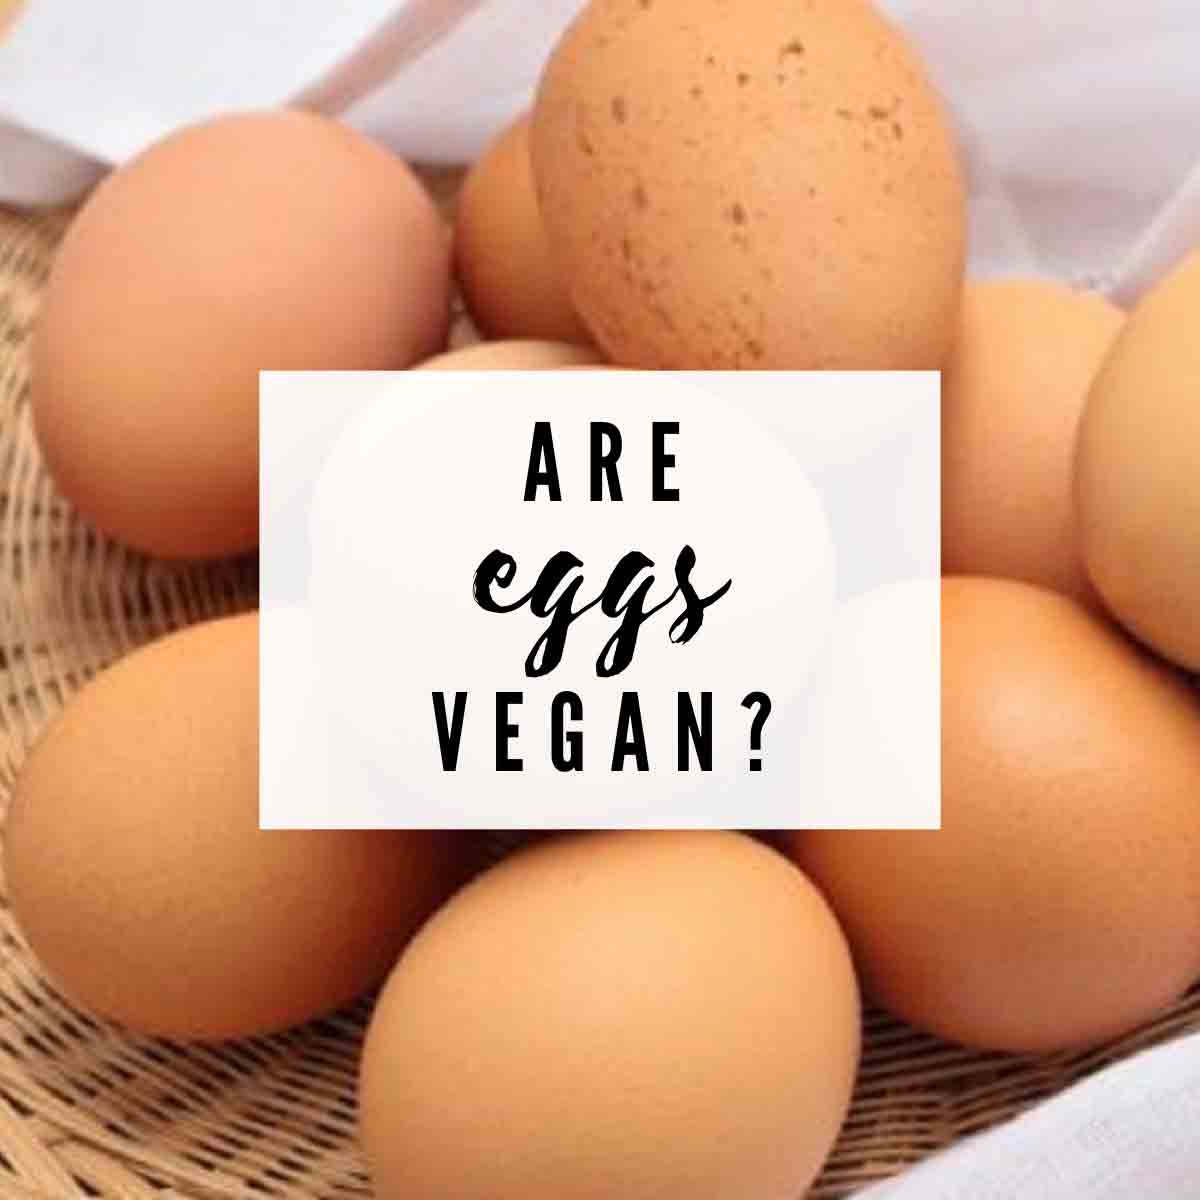 Image Of Eggs With Text Overlay That Reads Are Eggs Vegan